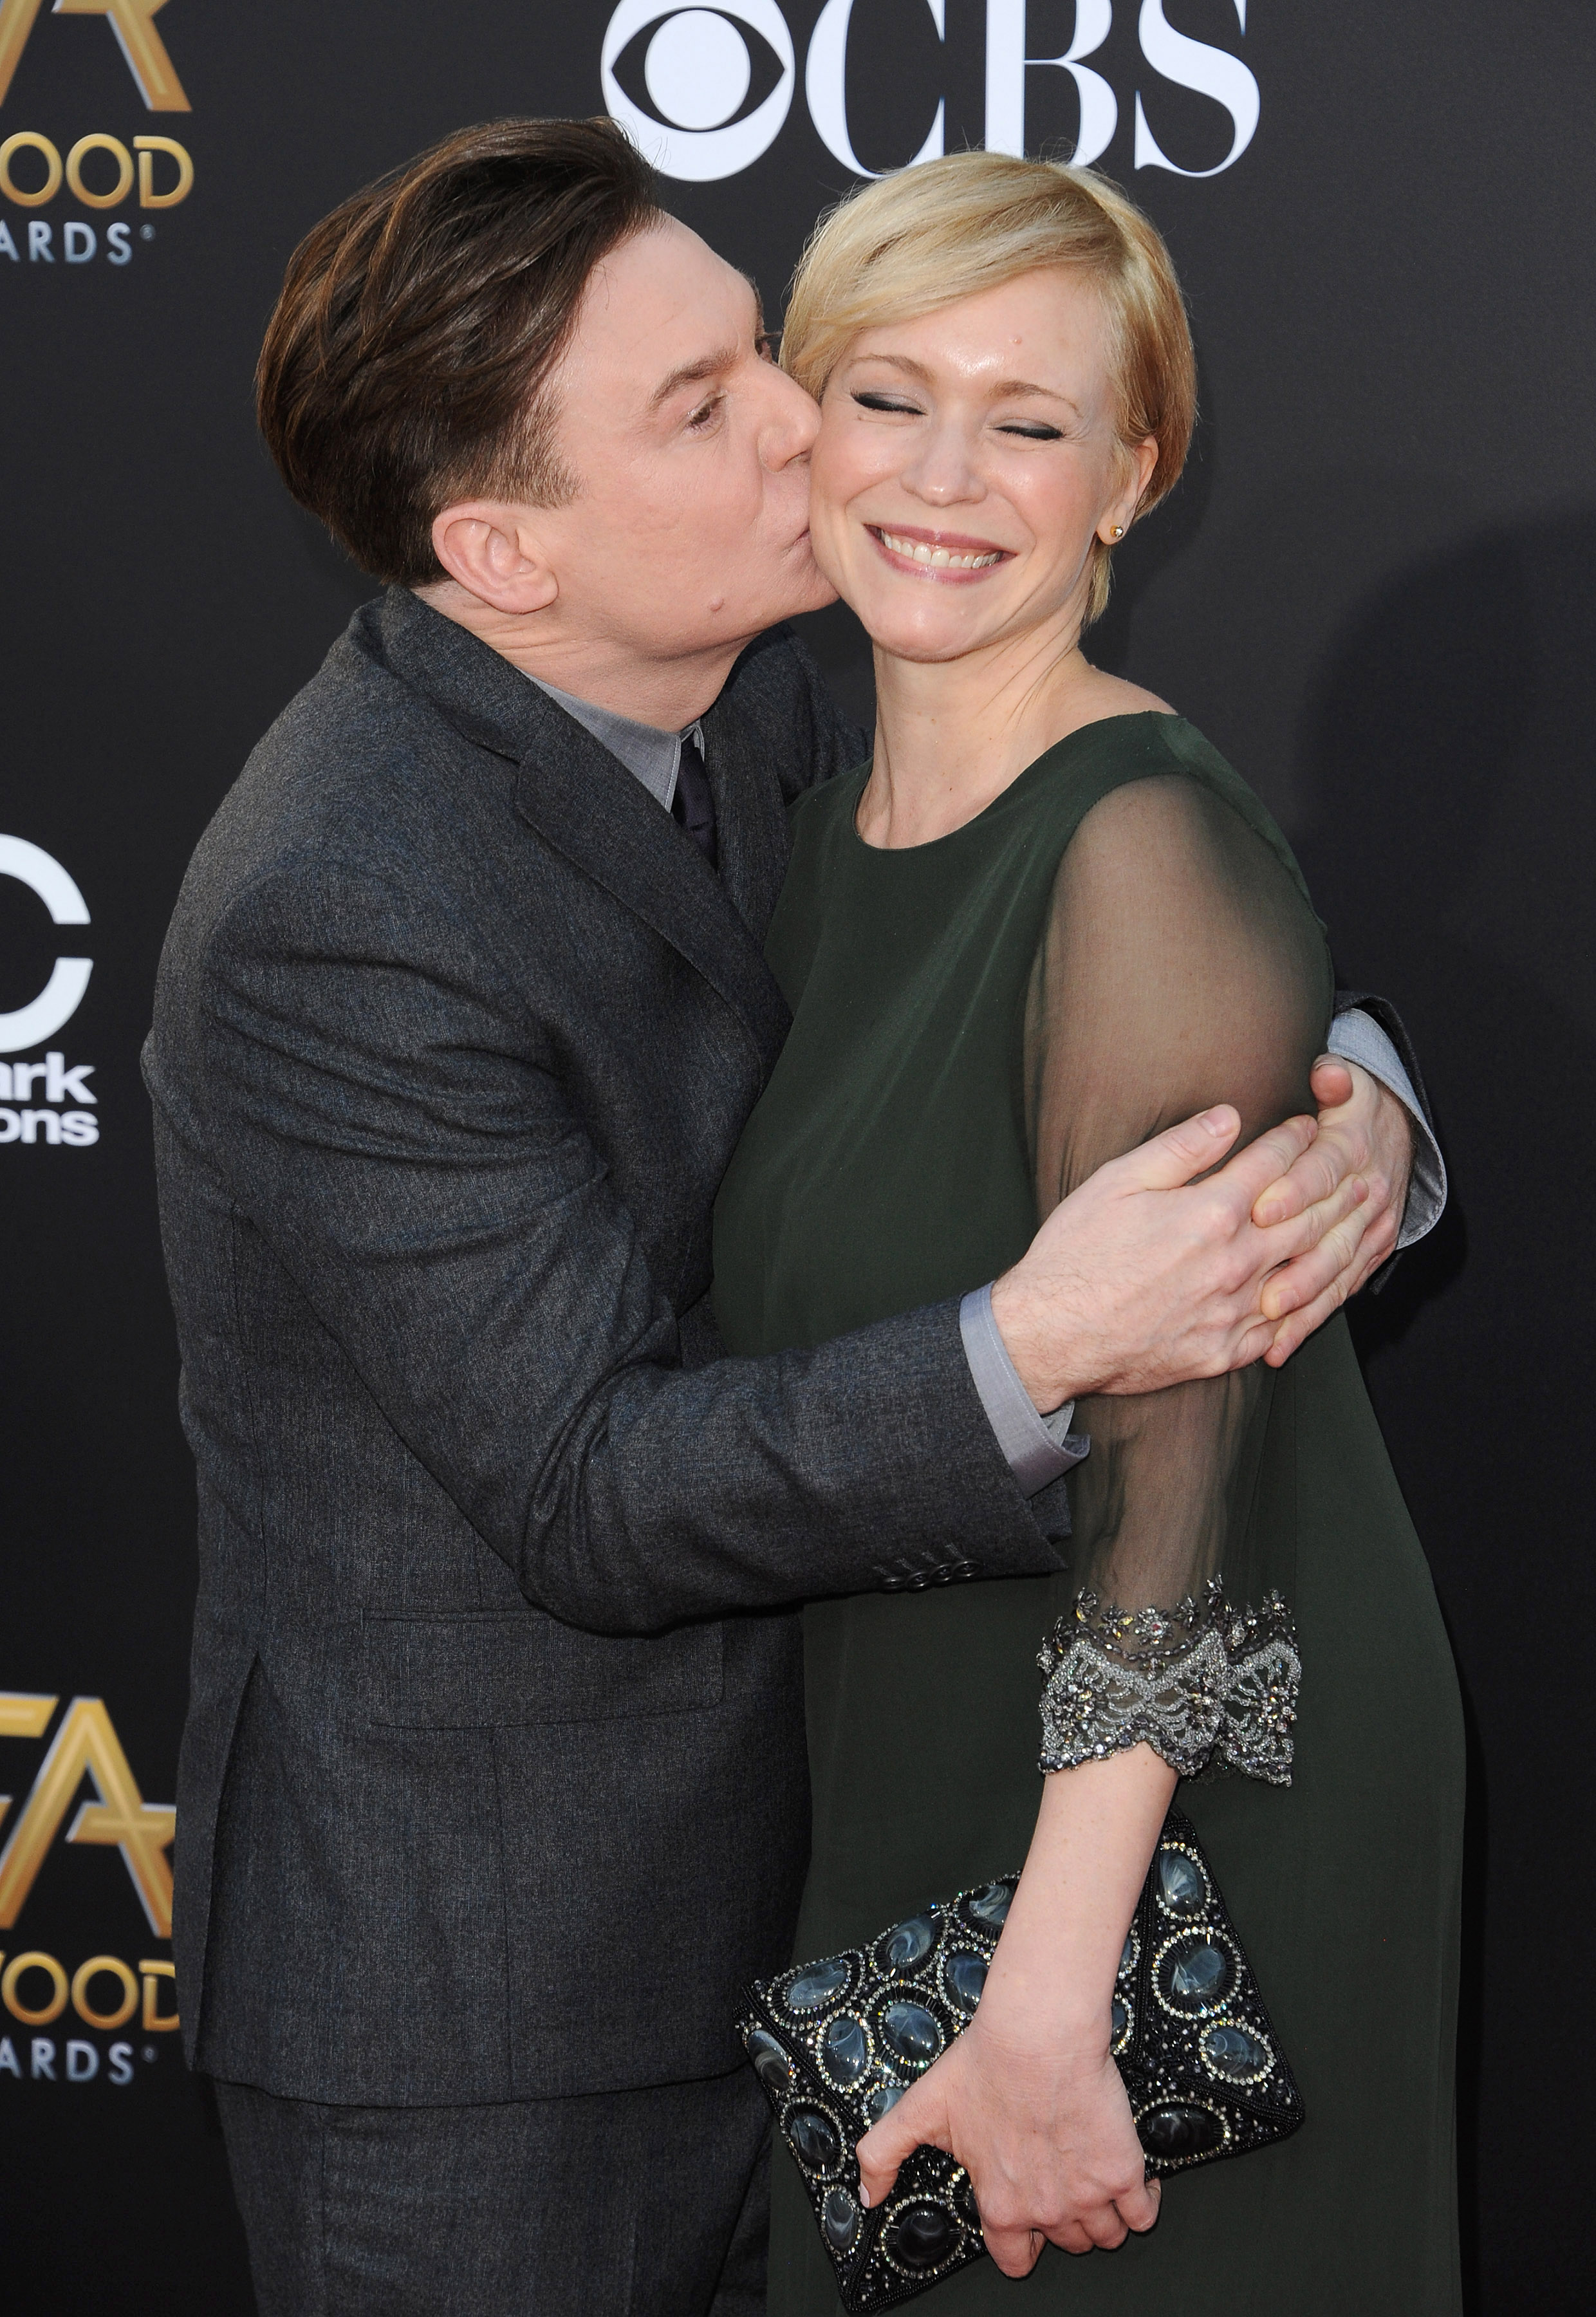 Mike Myers and wife Kelly Tisdale arrive at the 18th Annual Hollywood Film Awards on November 14, 2014 in Hollywood, California | Source: Getty Images.